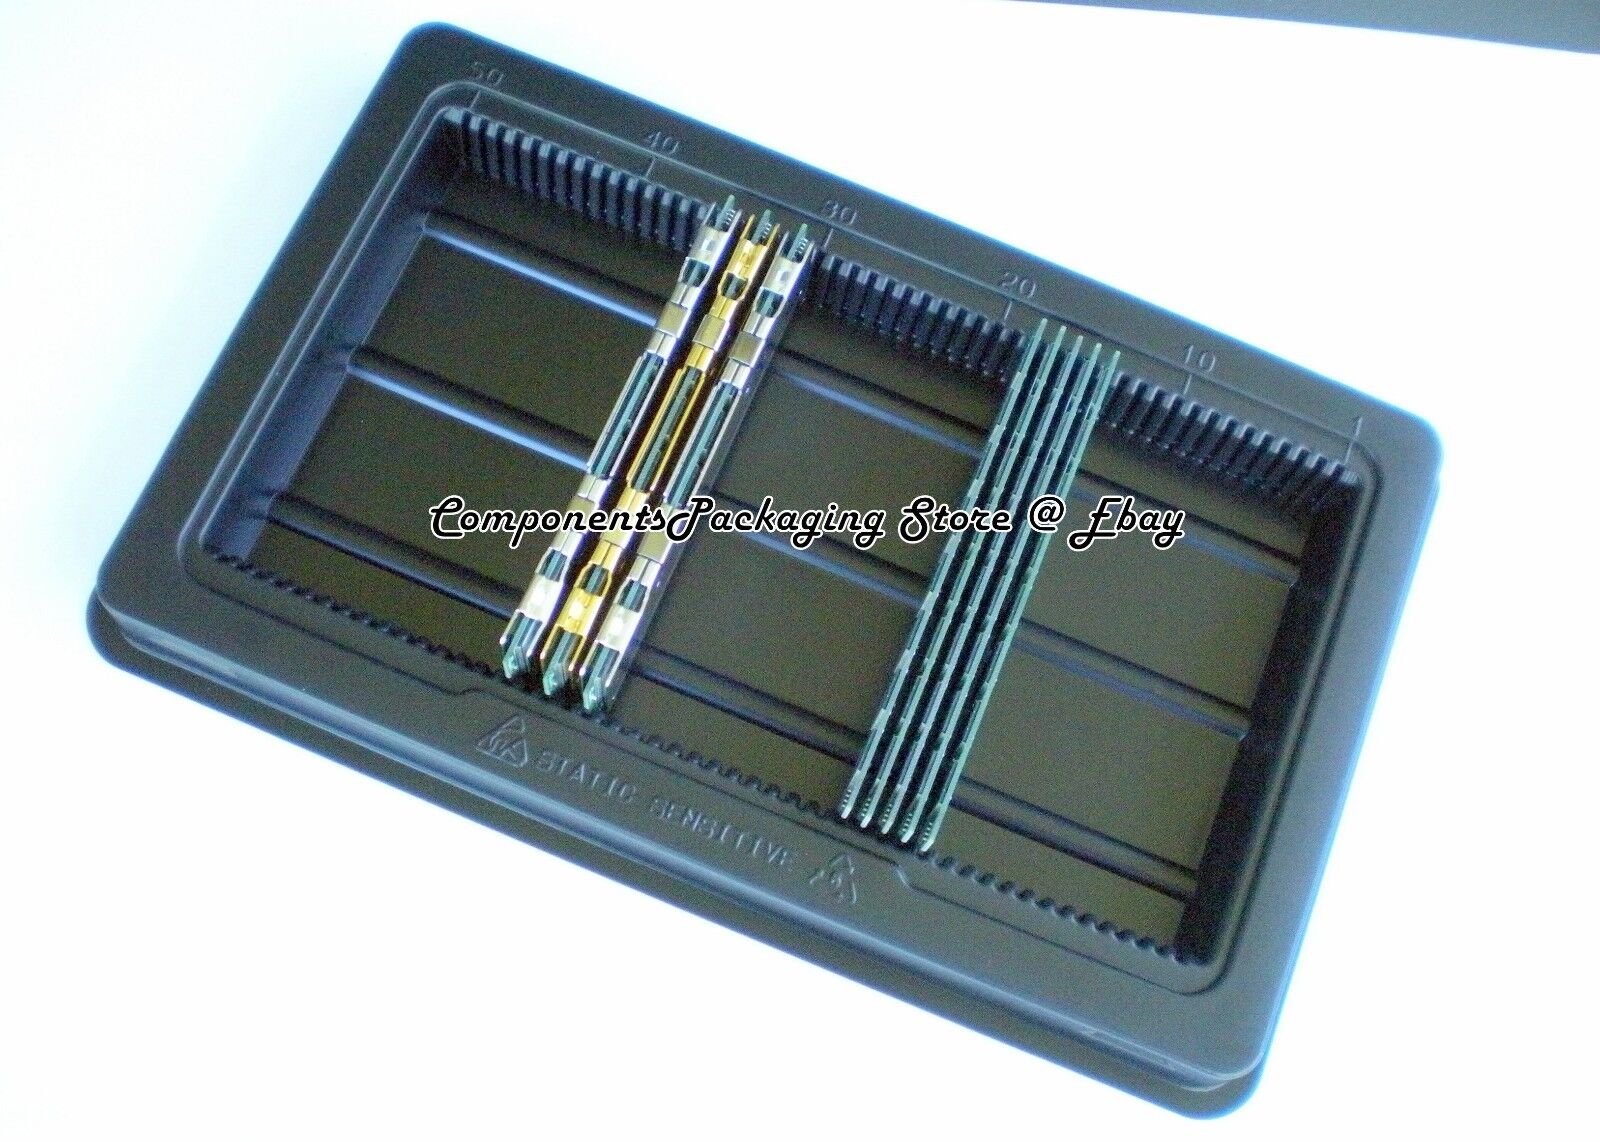 Memory Sticks Box Tray for PC Server DDR DIMM Modules Anti Static - 2 fits 100 